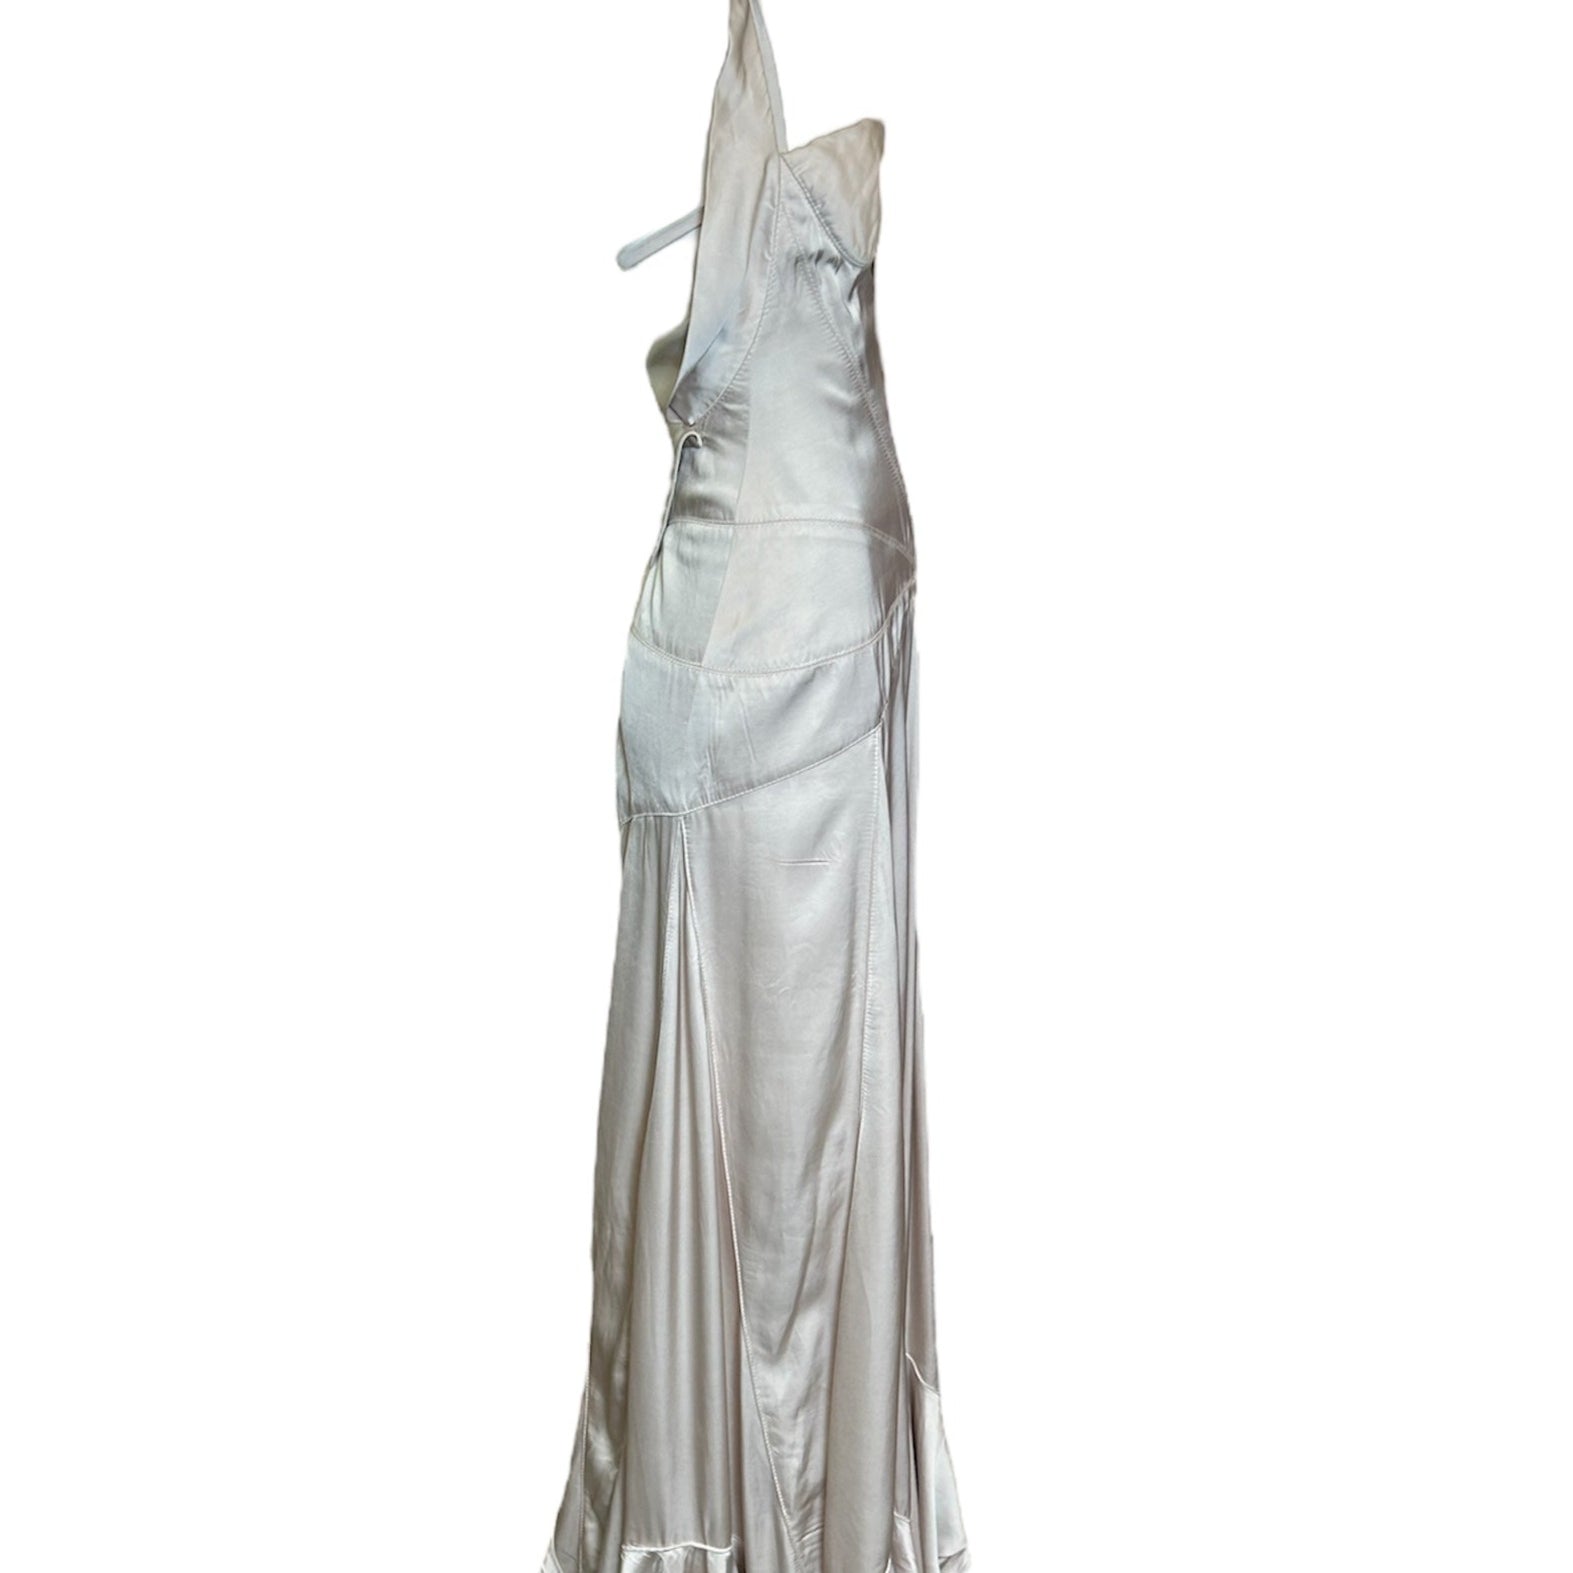  Gianfranco Ferre Silk Oyster Halter Gown SIDE PHOTO 2 OF 4